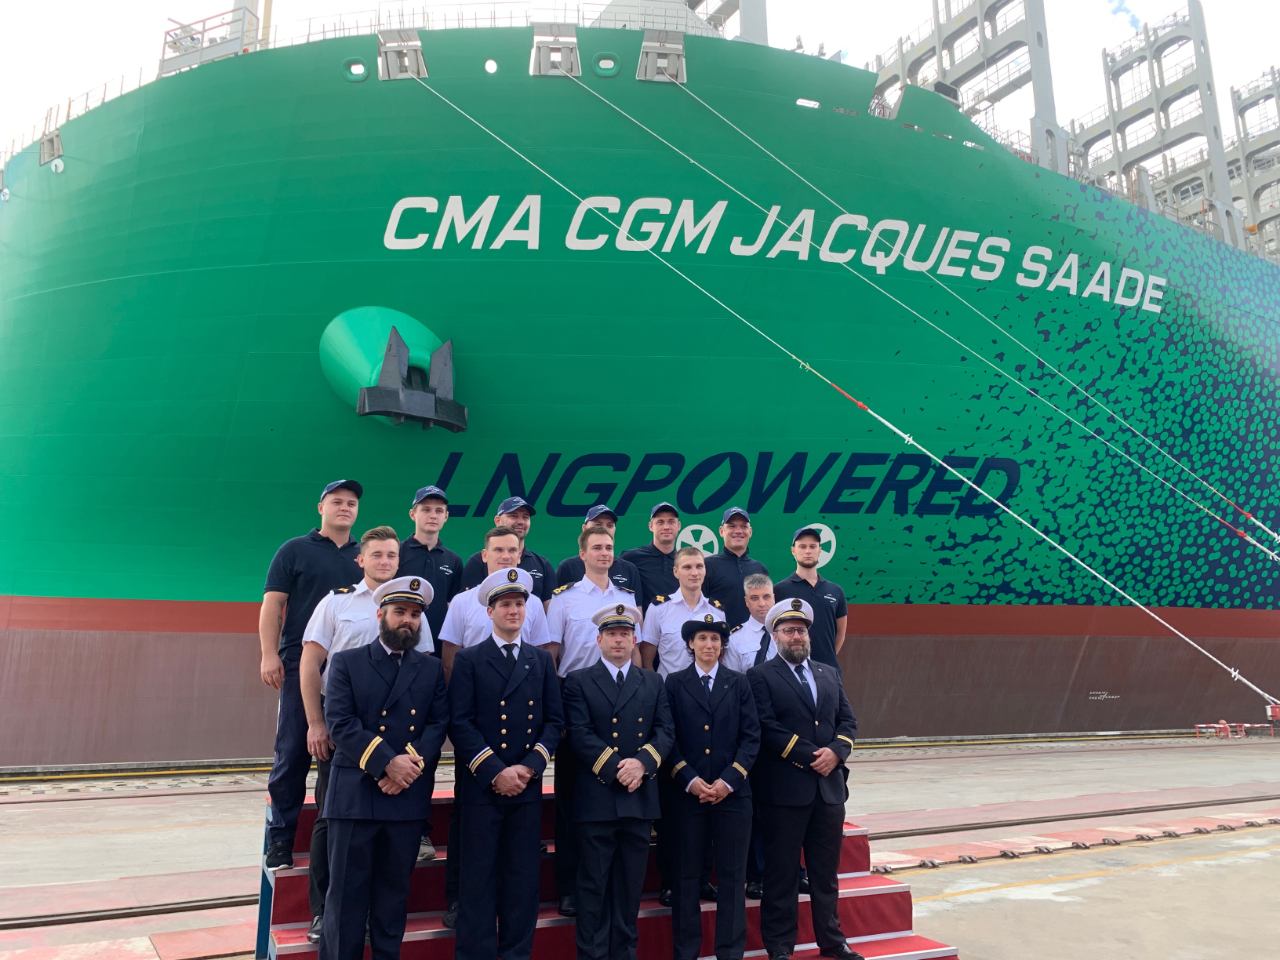 The CMA CGM JACQUES SAADE joins the fleet: The first 23,000 TEU container vessel in the world to be powered by LNG